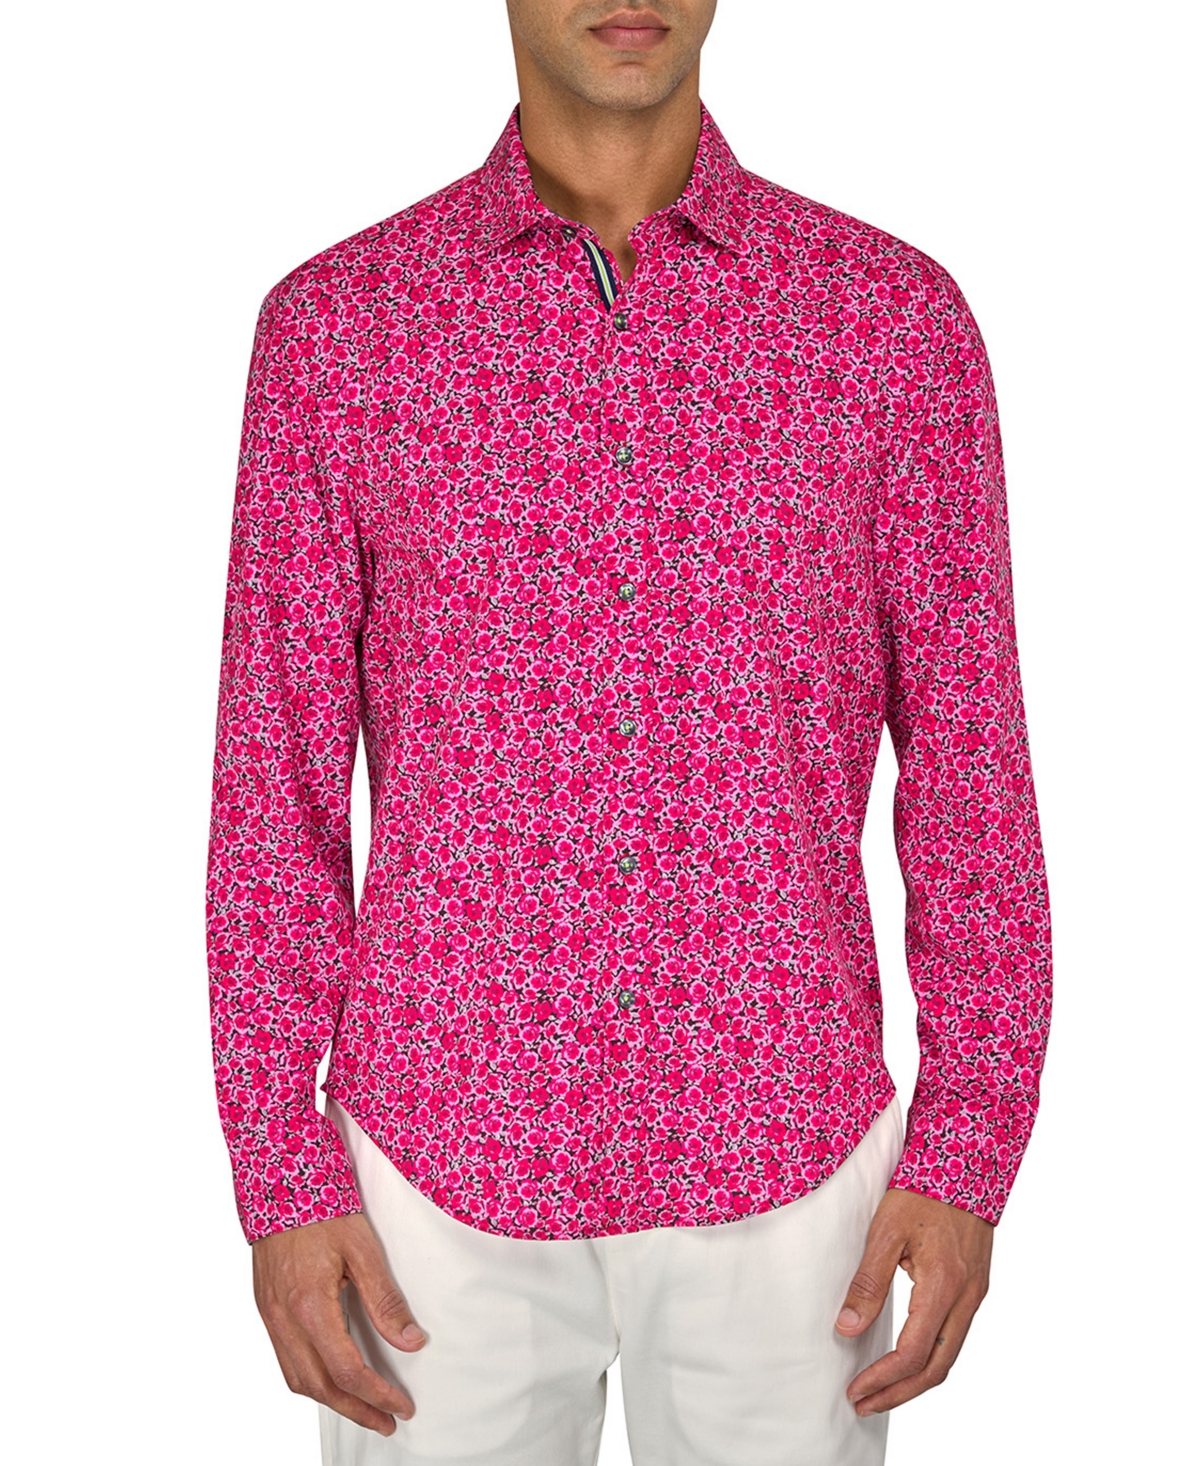 Men's Regular-Fit Non-Iron Performance Stretch Rose-Print Button-Down Shirt - Red